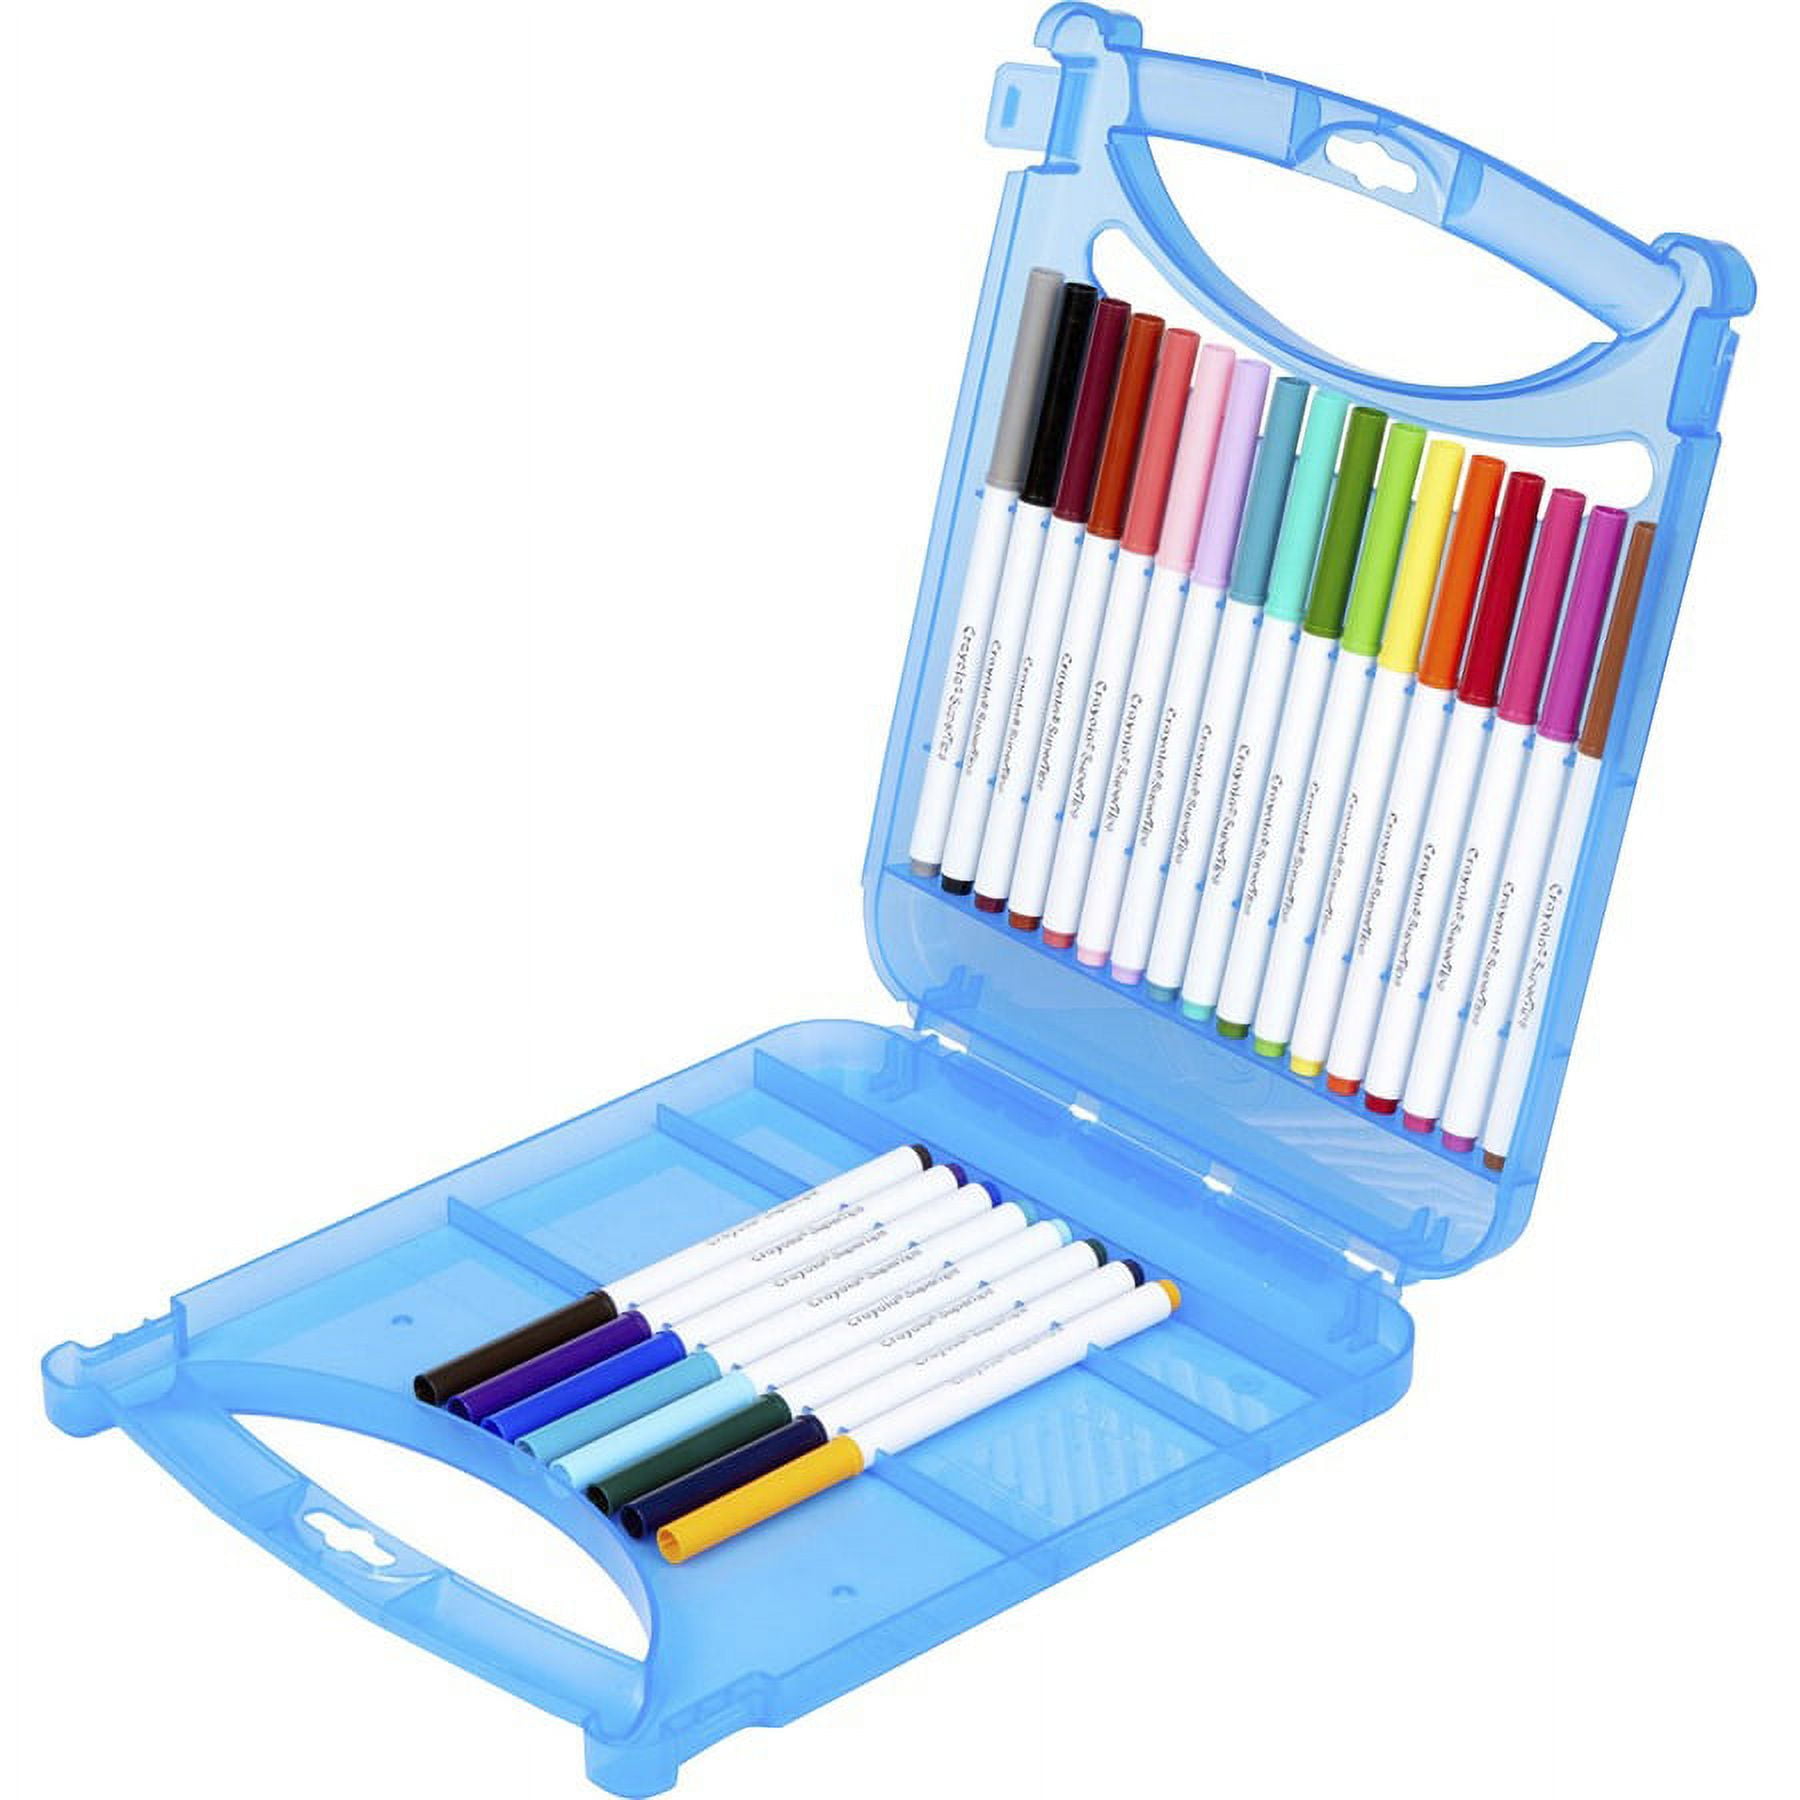 Crayola Super Tips Art Kit - Classroom, Home, Art - Recommended